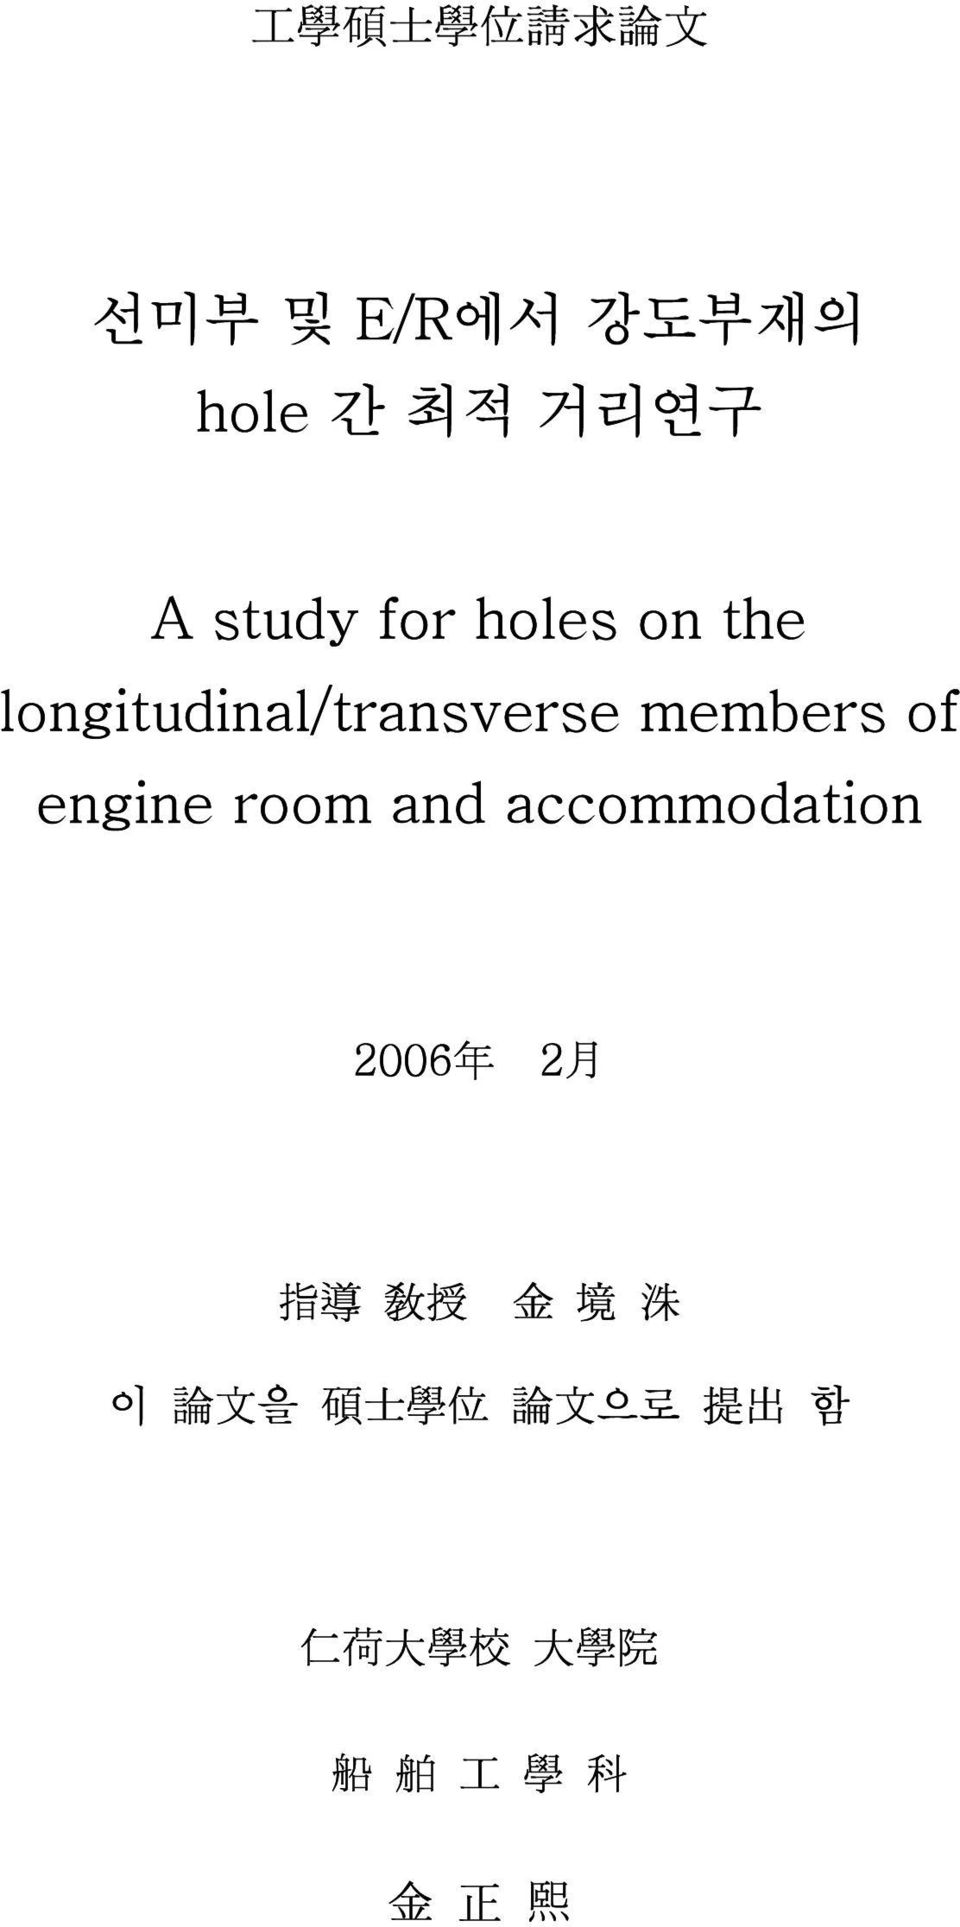 of engine room and accommodation 2006 年 2 月 指 導 敎 授 金 境